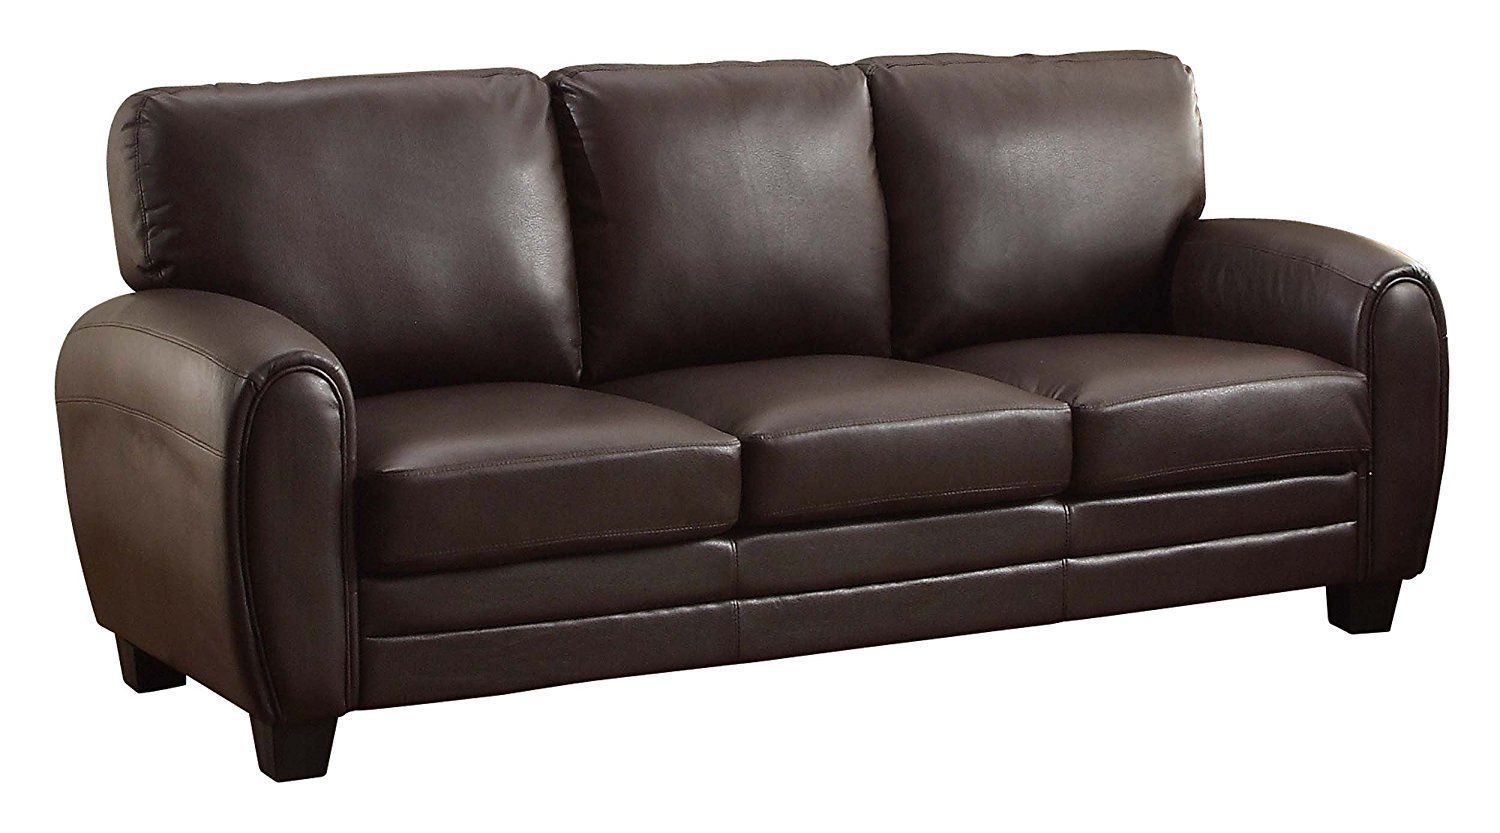 Brown Faux Leather Couch – Home Furniture Design With Regard To Faux Leather Sofas In Chocolate Brown (View 19 of 20)